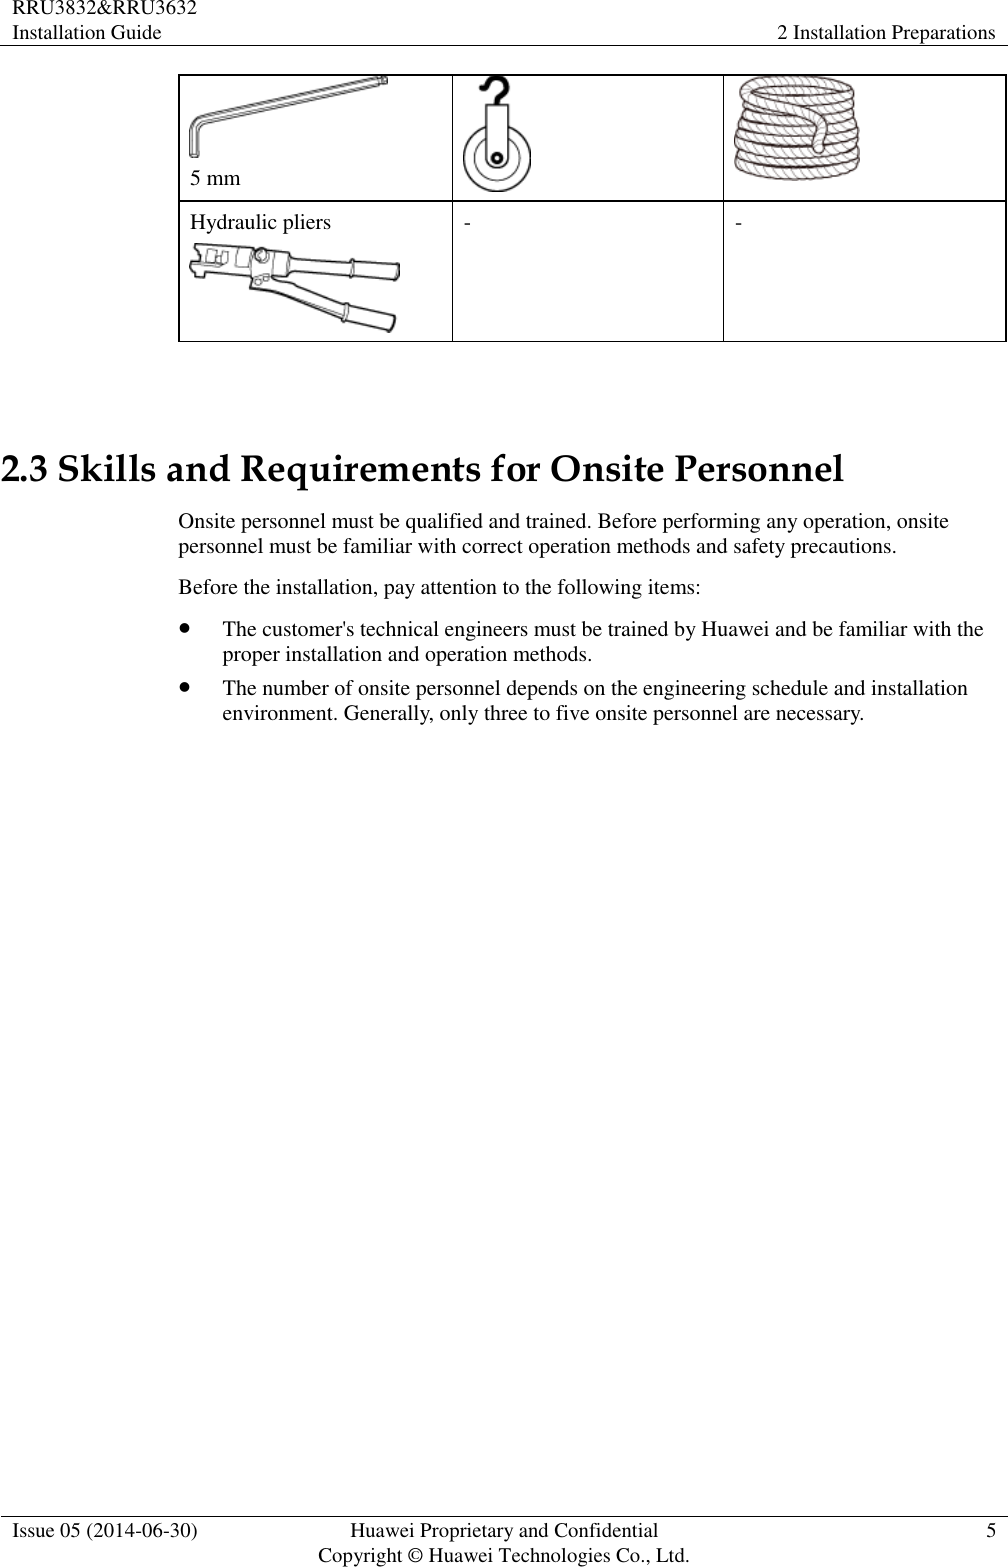 RRU3832&amp;RRU3632 Installation Guide 2 Installation Preparations  Issue 05 (2014-06-30) Huawei Proprietary and Confidential                                     Copyright © Huawei Technologies Co., Ltd. 5   5 mm   Hydraulic pliers  - -  2.3 Skills and Requirements for Onsite Personnel Onsite personnel must be qualified and trained. Before performing any operation, onsite personnel must be familiar with correct operation methods and safety precautions. Before the installation, pay attention to the following items:  The customer&apos;s technical engineers must be trained by Huawei and be familiar with the proper installation and operation methods.  The number of onsite personnel depends on the engineering schedule and installation environment. Generally, only three to five onsite personnel are necessary. 